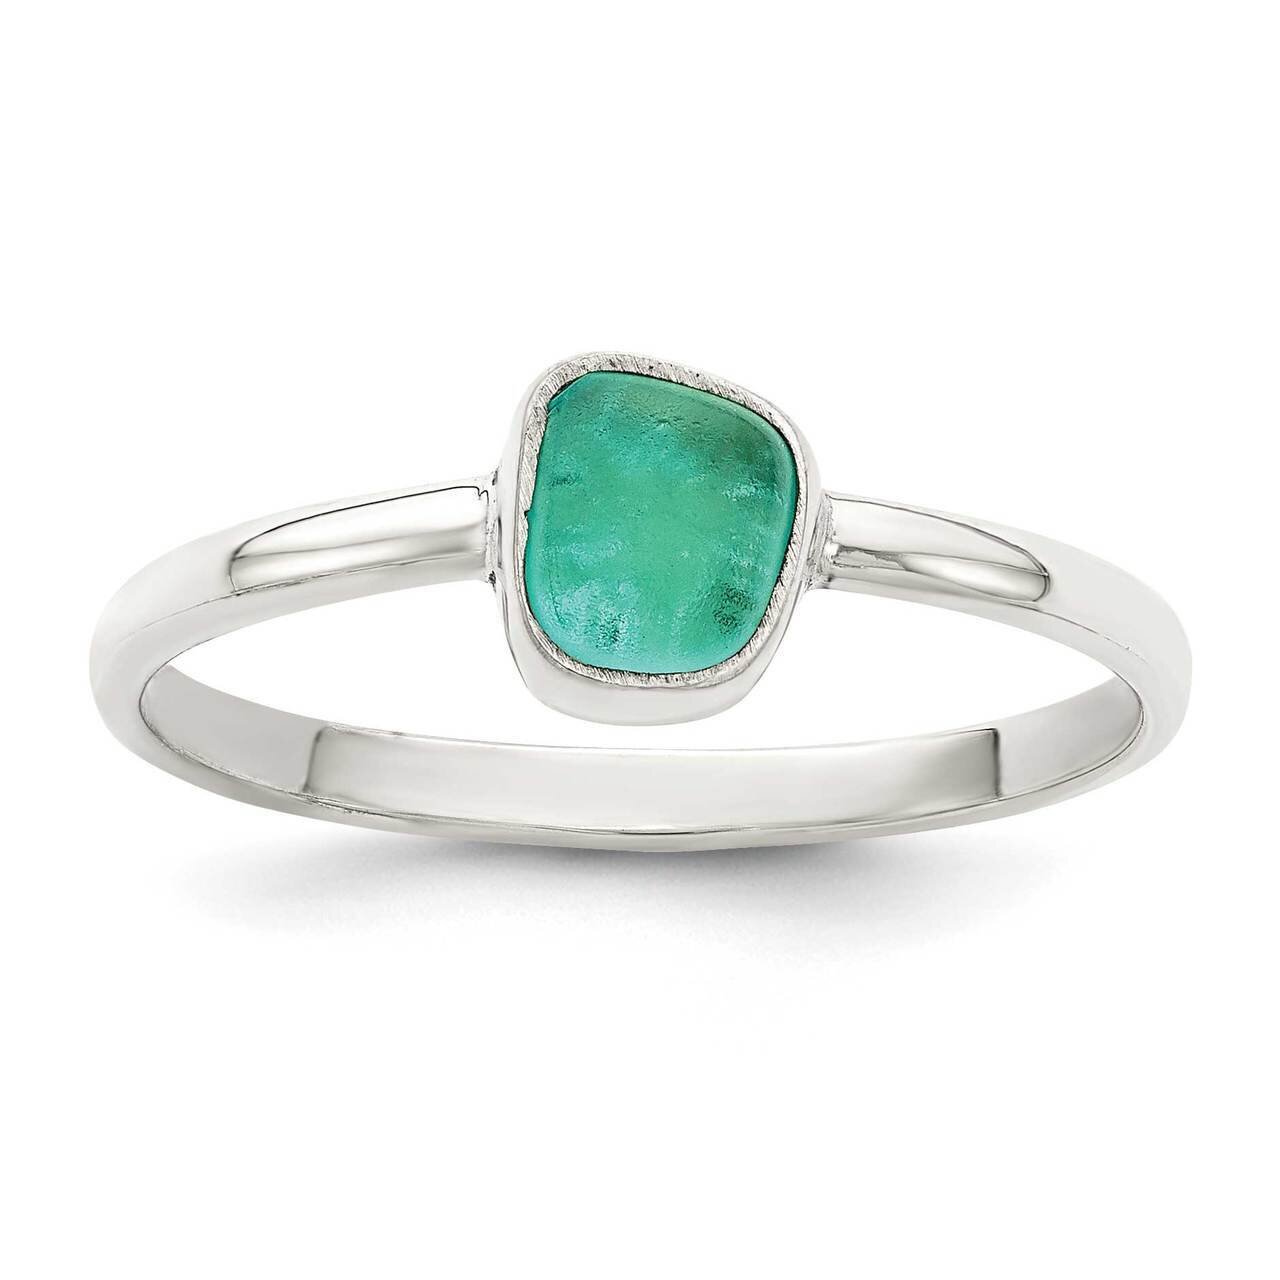 Teal Sea Glass Ring Sterling Silver QR7061 Size 6